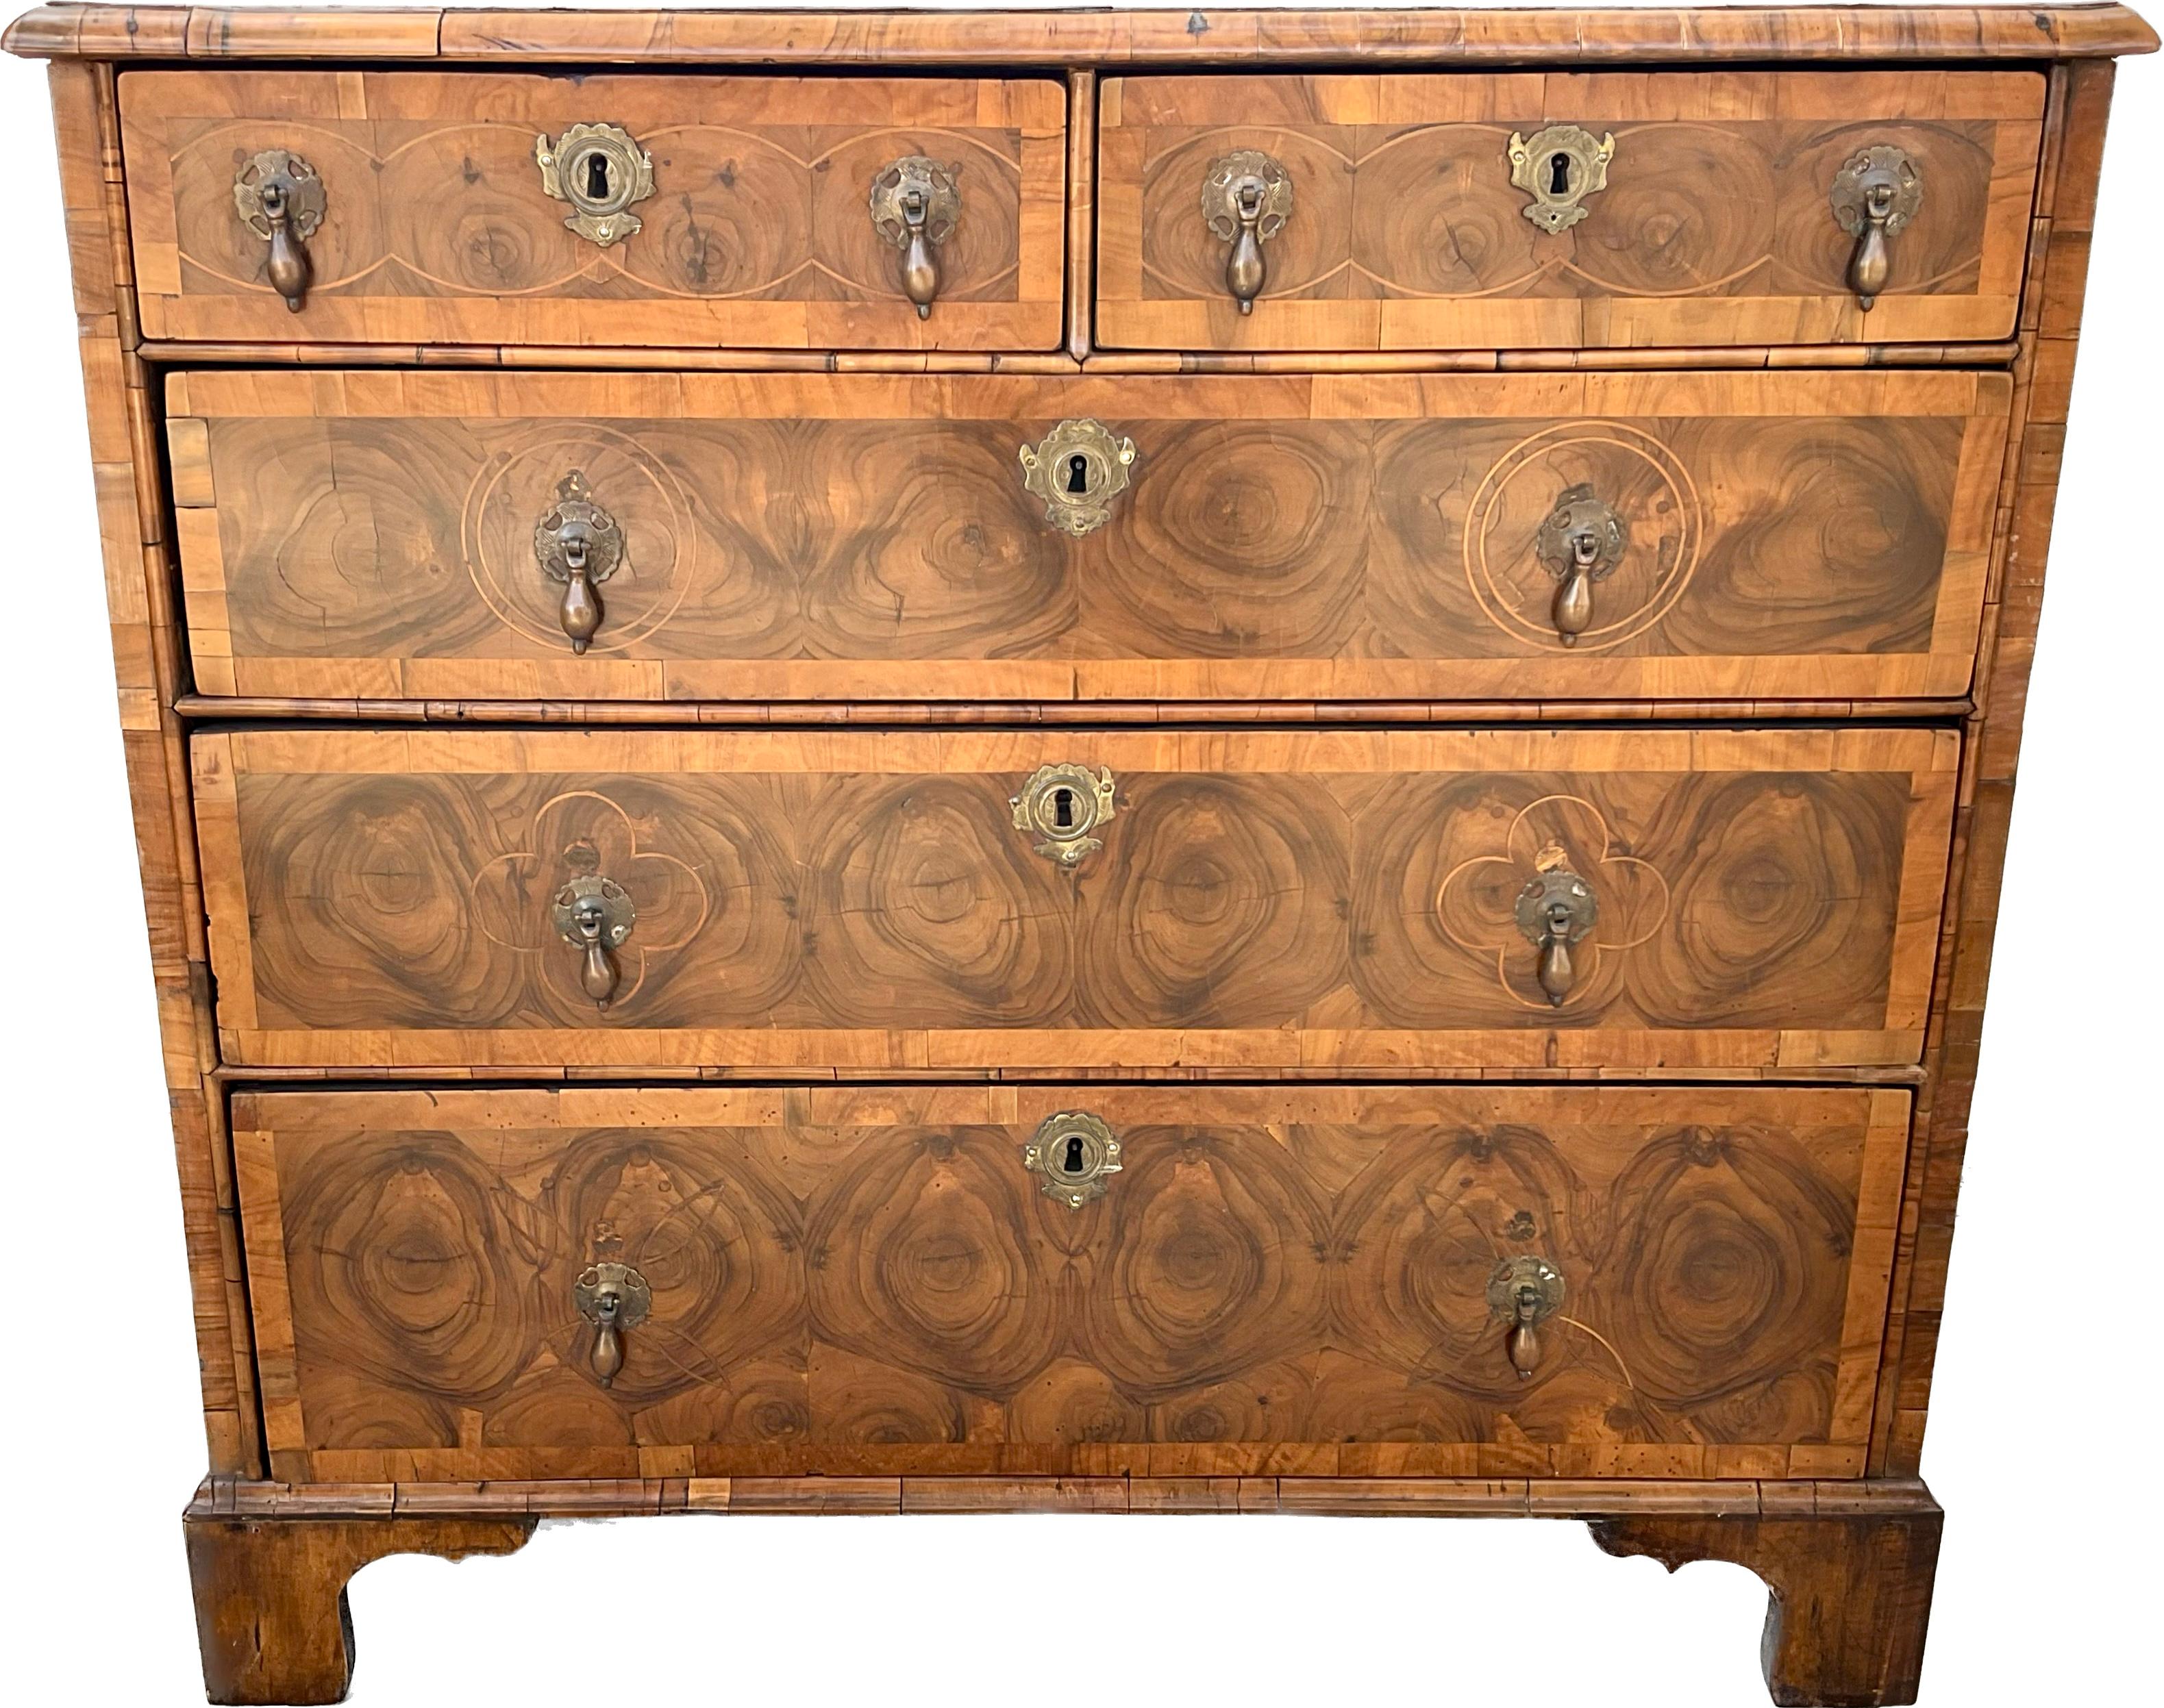 A William and Mary burl cross-branded oyster veneered walnut chest of drawers. Has two short and three long drawers. Dovetail drawers with brass teardrop pulls and brass hardware. Chest stands on wooden bracket feet. 